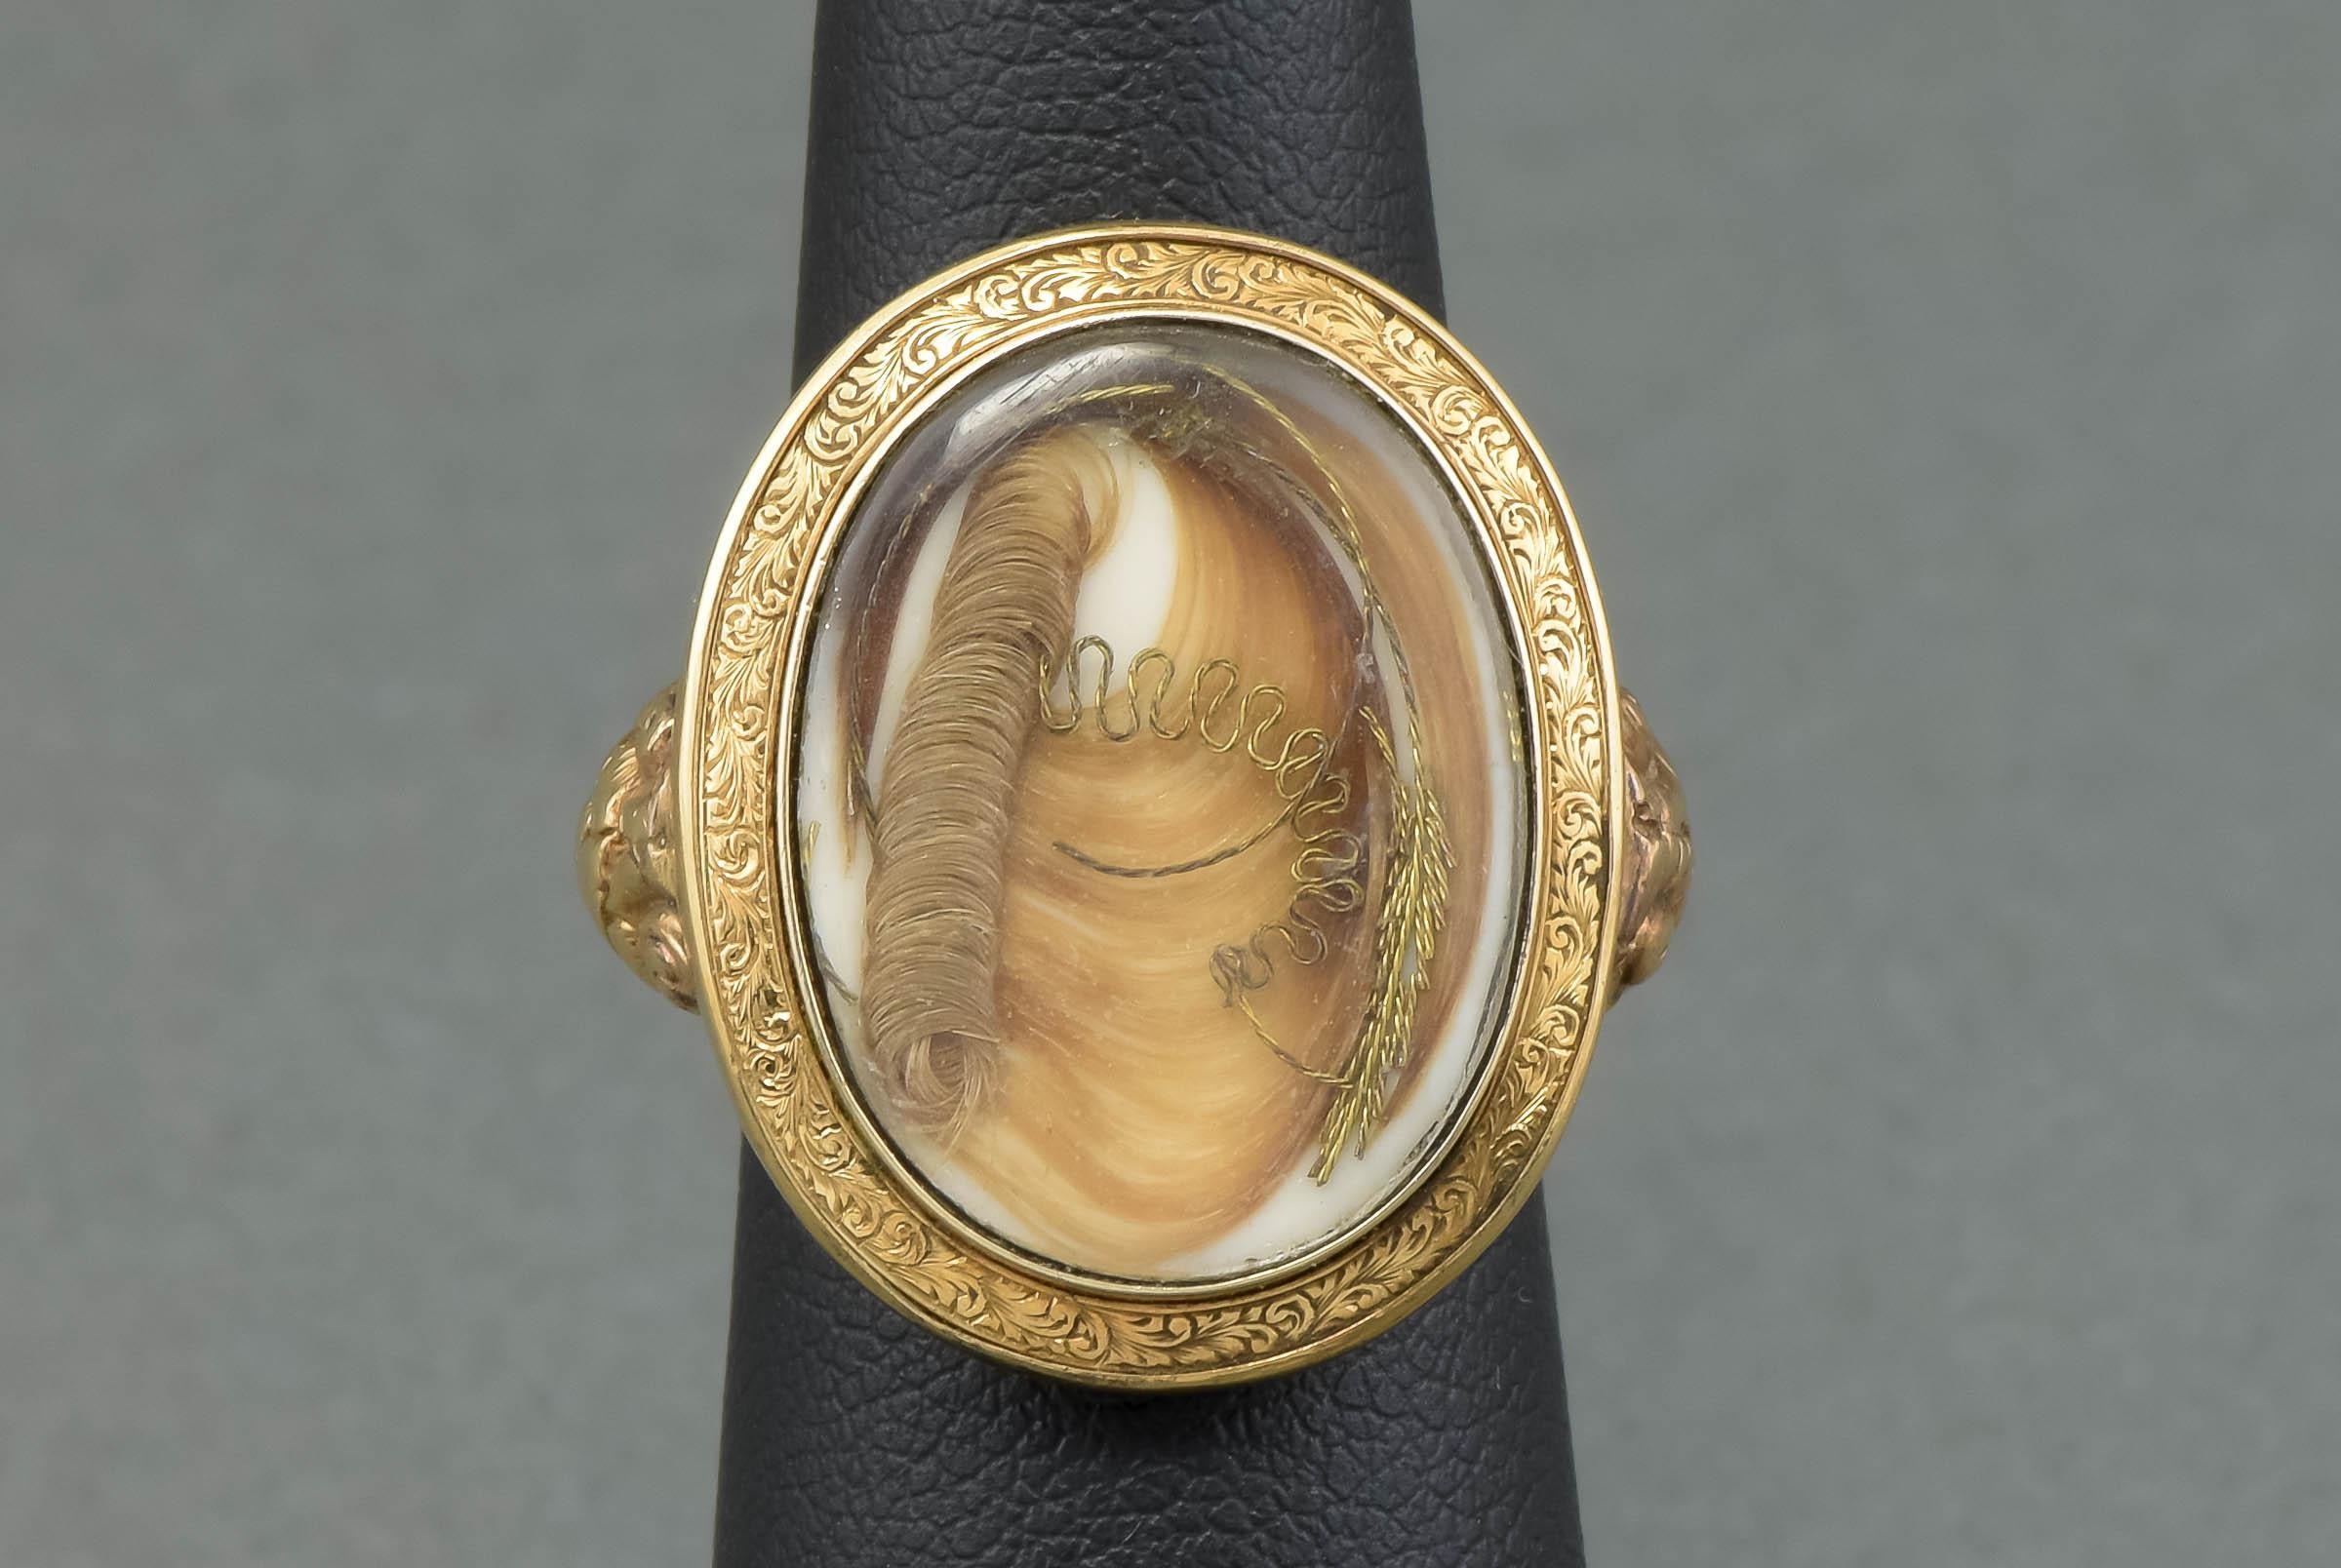 Dating to 1860, this lovely Victorian hair work ring was likely once a sentimental or mourning brooch or pendant. At some point in the Victorian period it was converted into the lovely ring it is now.

Crafted of gold testing between 10K and 14K,